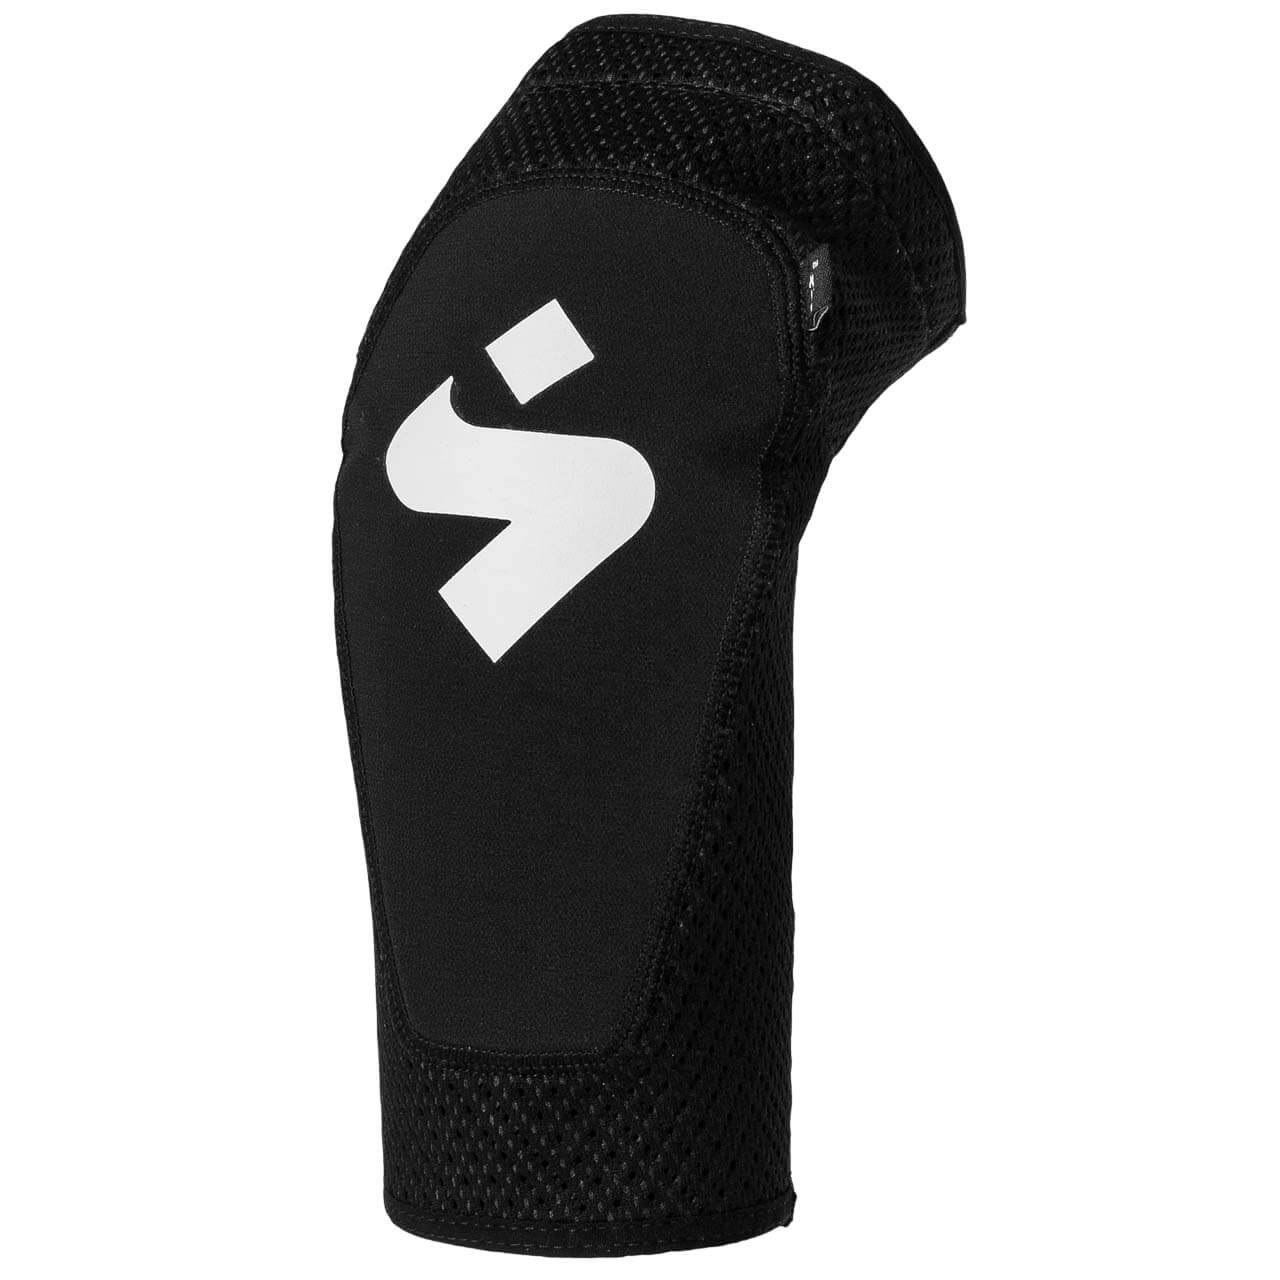 Sweet Protection Elbow Guards Light - Black, L